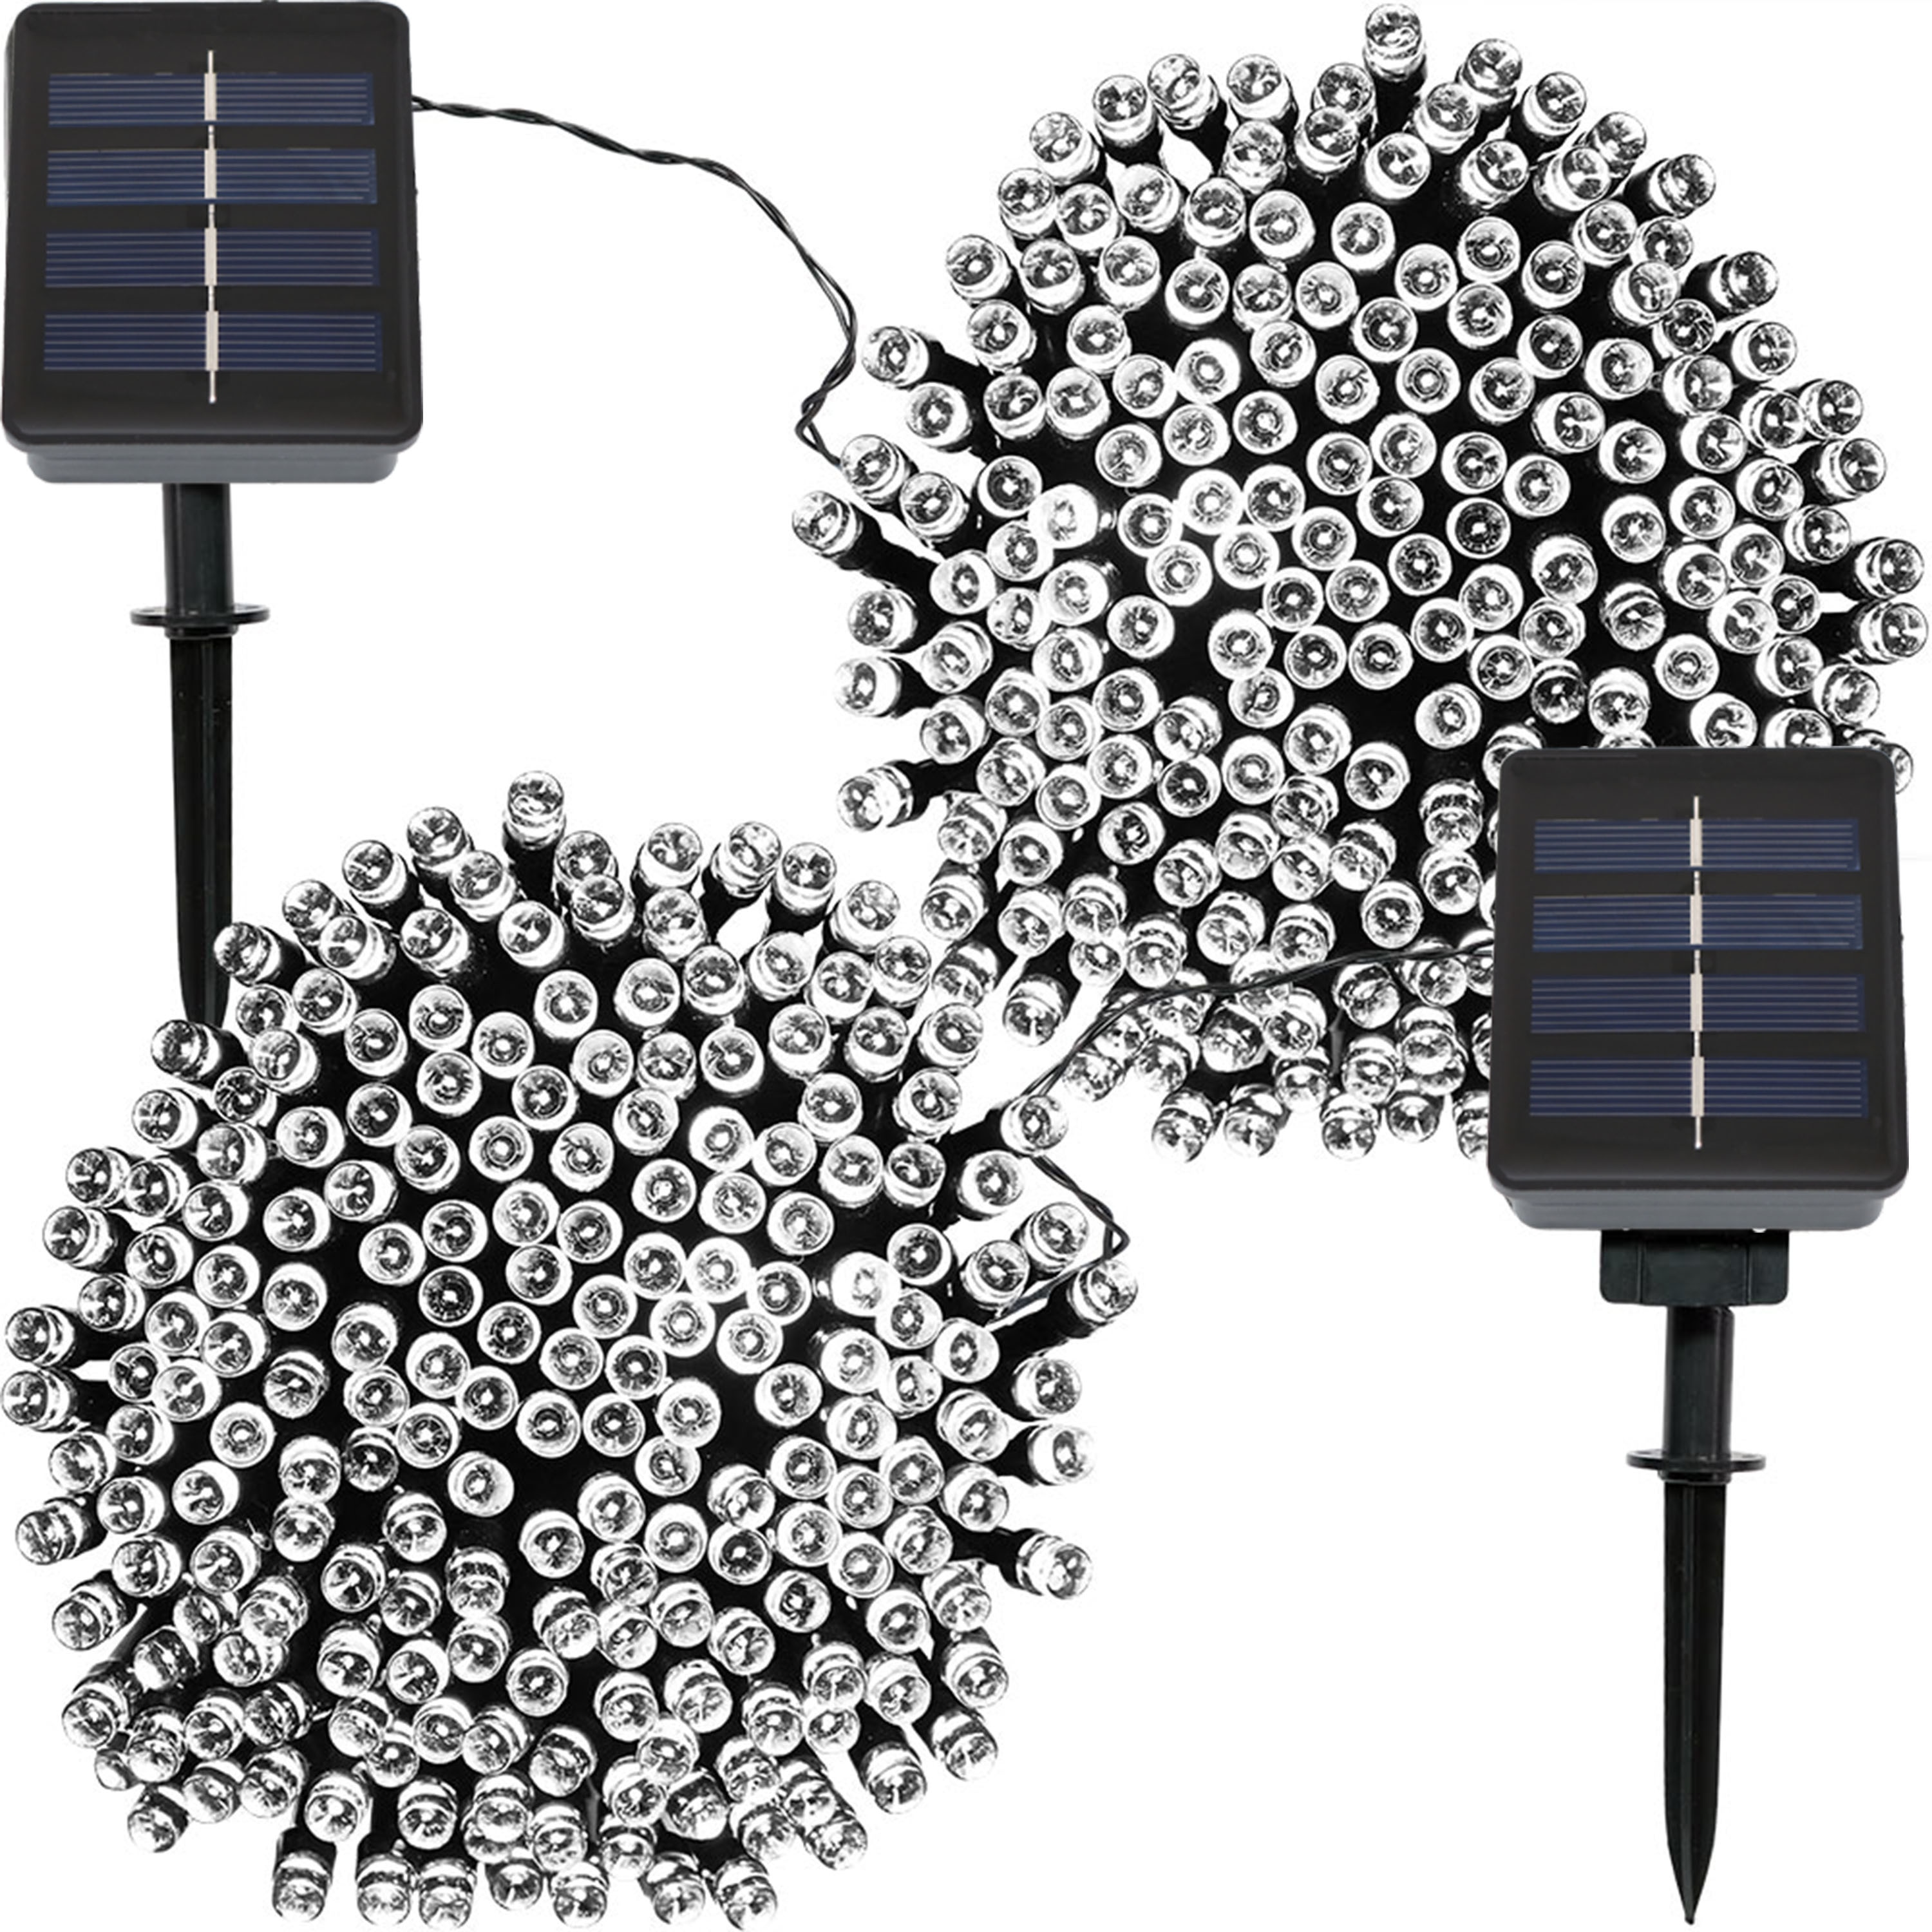 White Sunnydaze Set of 2 68 Foot 200-Count Solar Powered String Lights Outdoor Decorative 